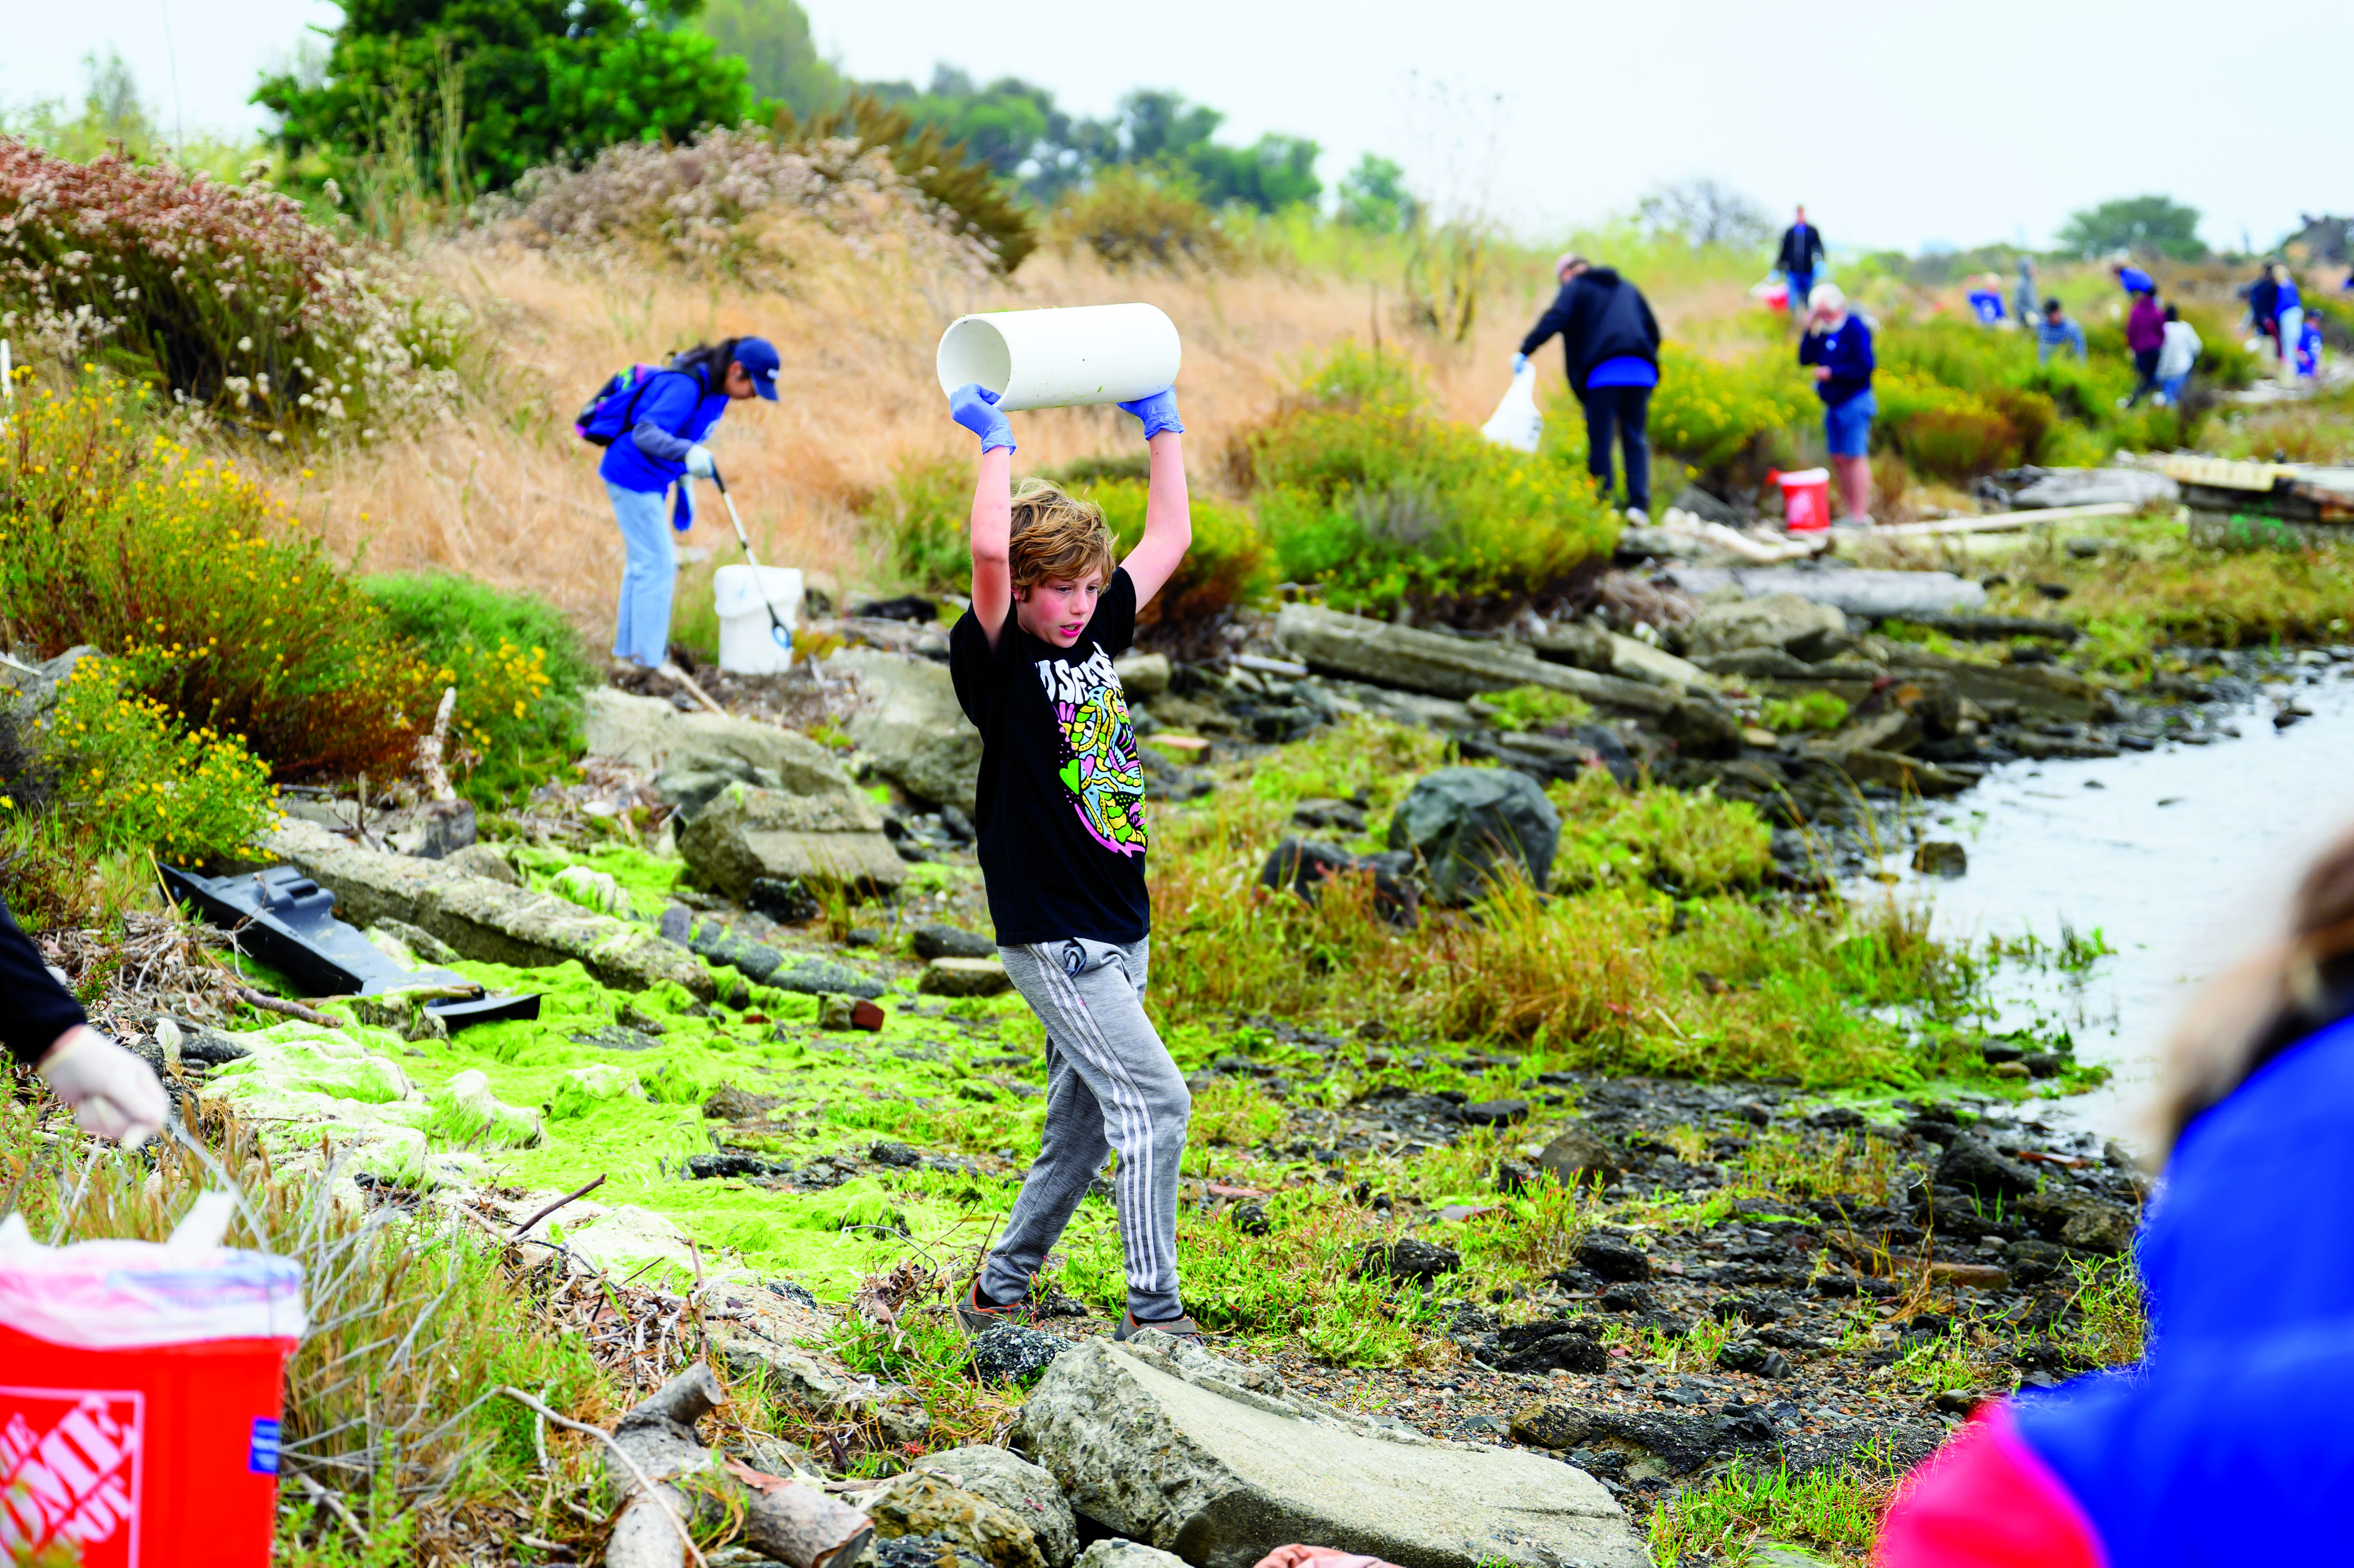 Young male tween wearing blue plastic gloves holds up a large section of plastic piping at the estuary wtih other clean up volunteers in the background.